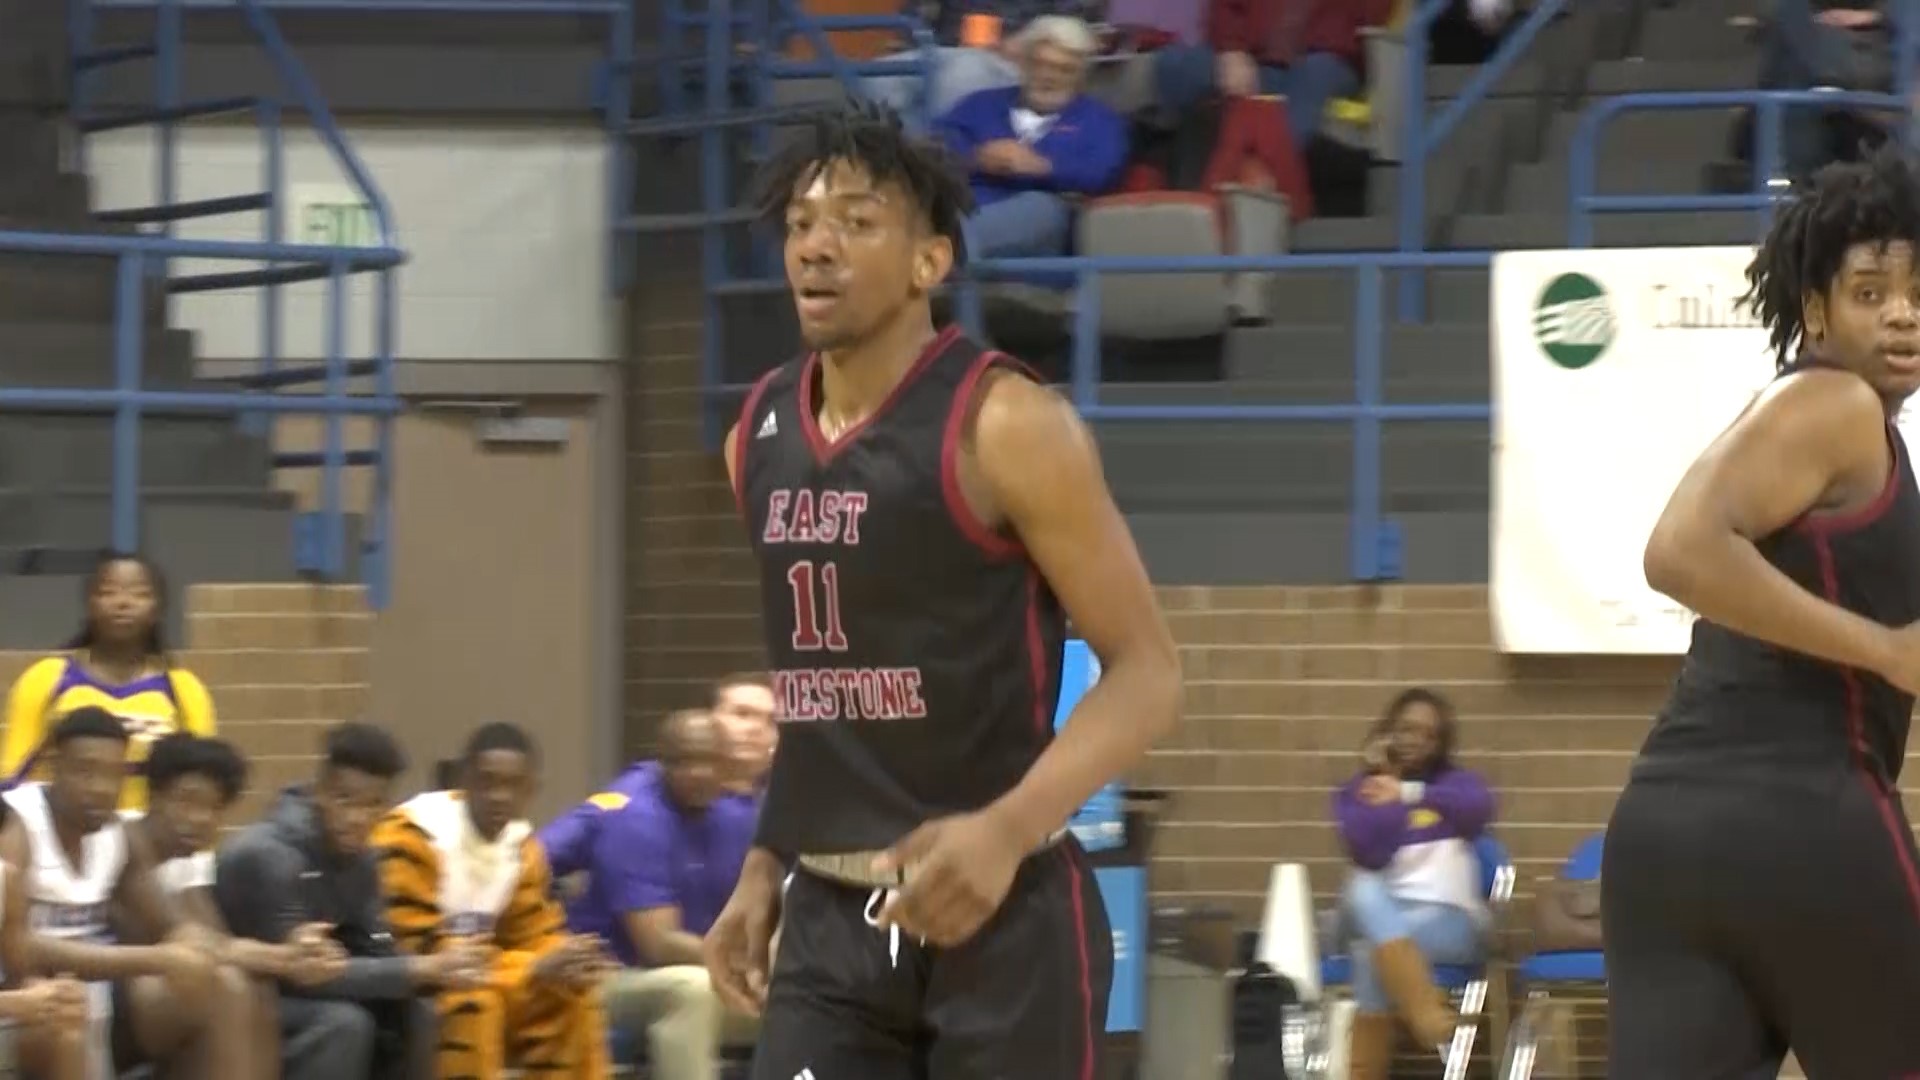 East Limestone basketball standout Austin Harvell committed to Tennessee Tech University this weekend. He chose TTU over Alabama, Auburn, Ole Miss, Samford, and Troy